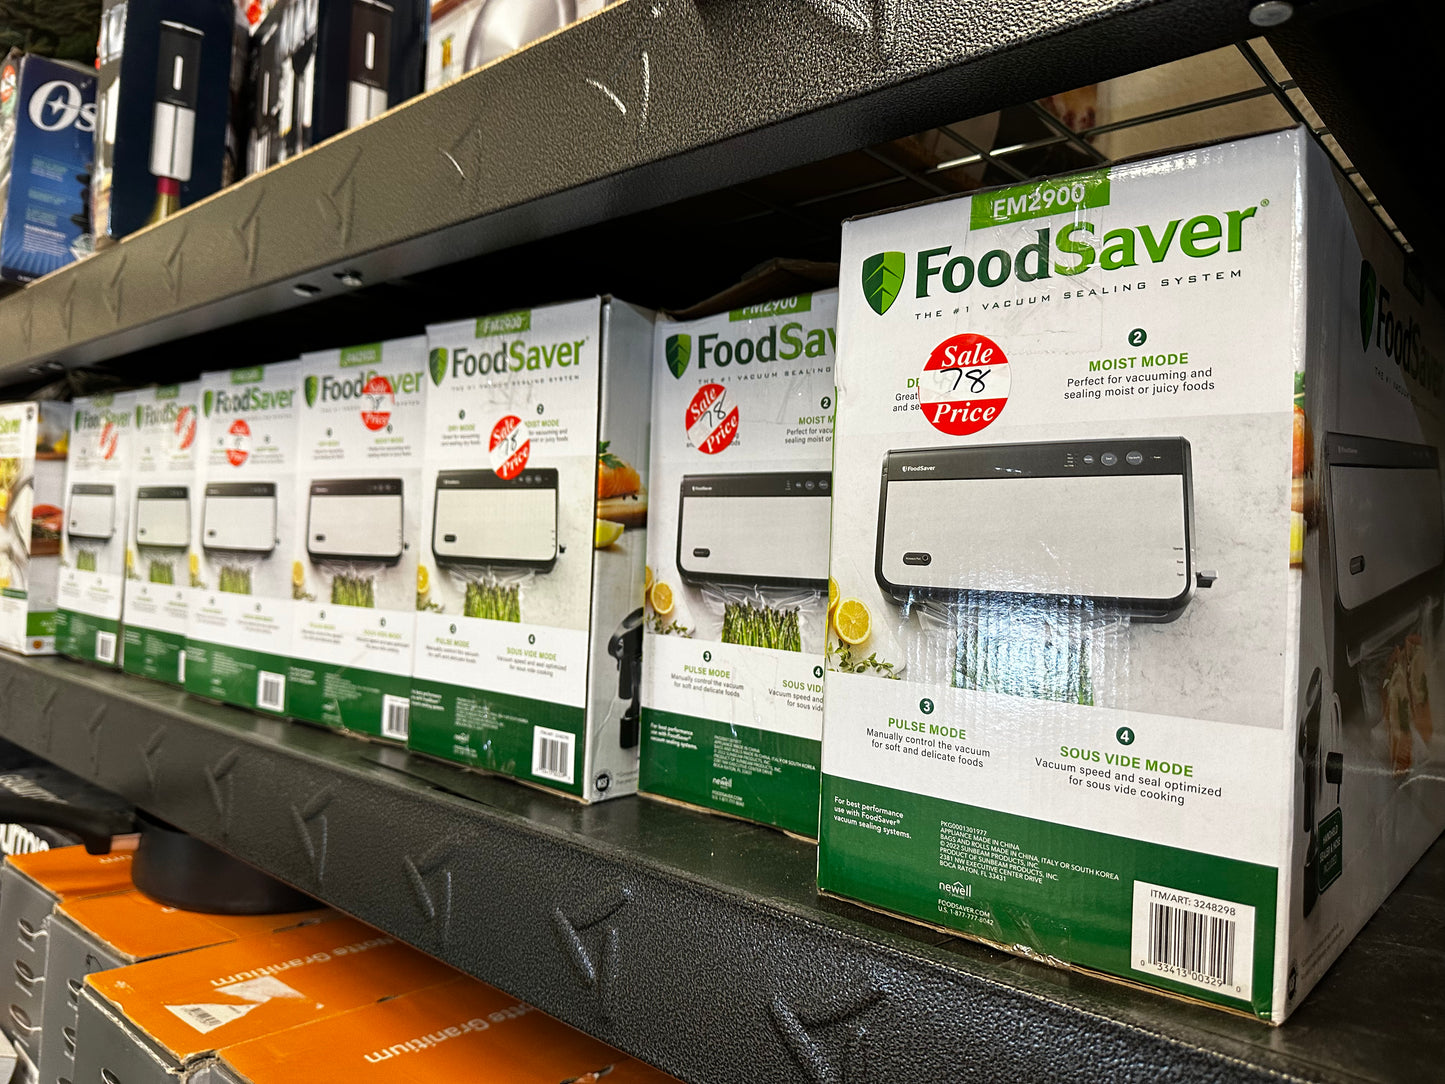 Food saver FM2900 with attachment